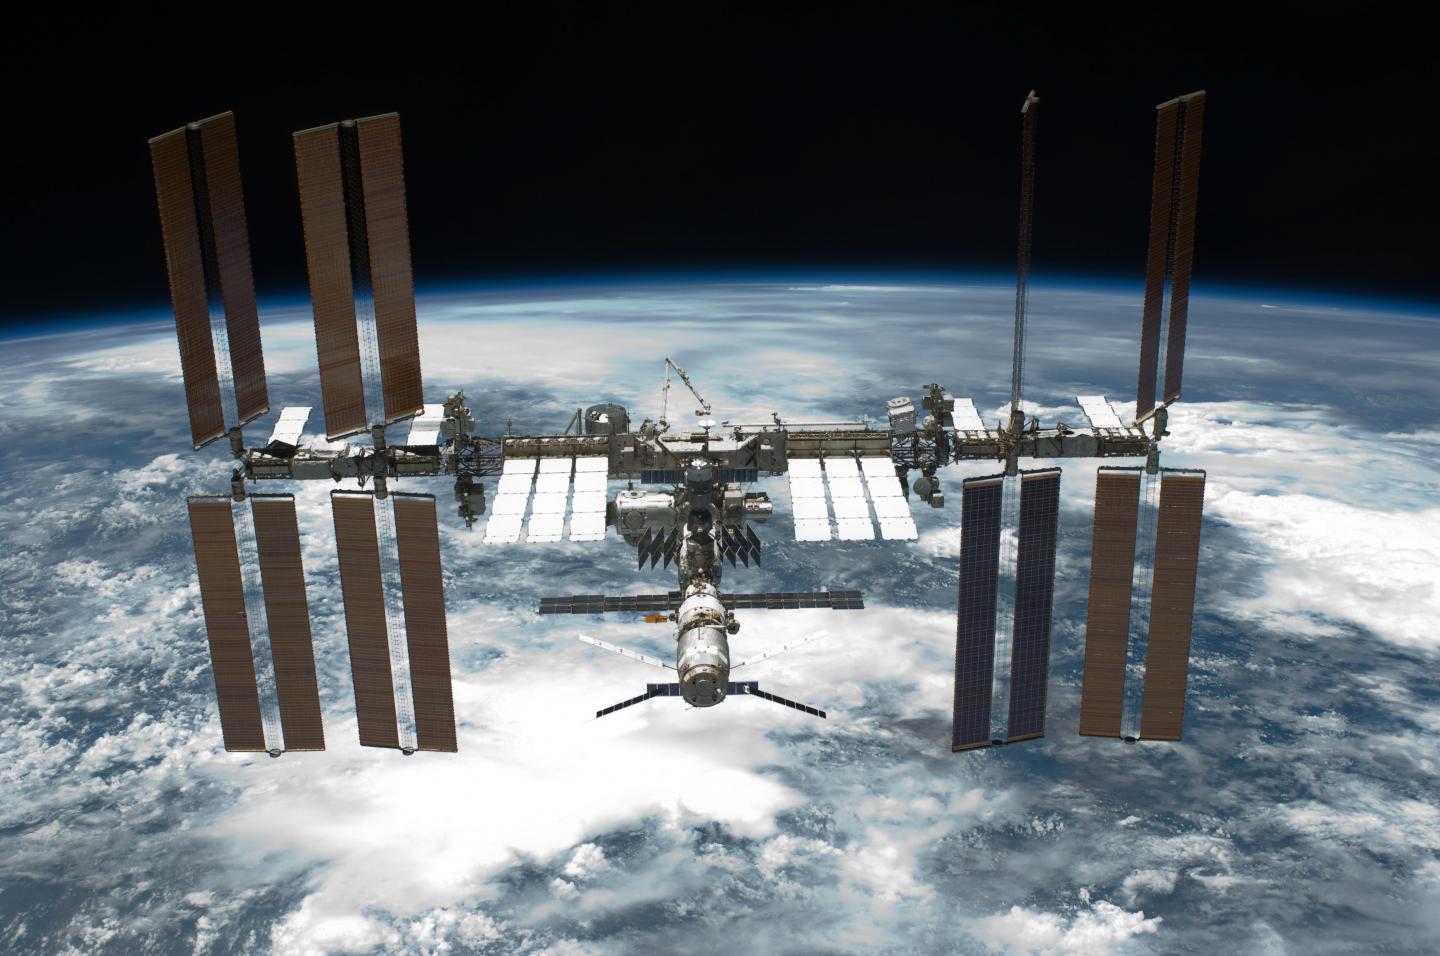 Astronauts aboard the International Space Station